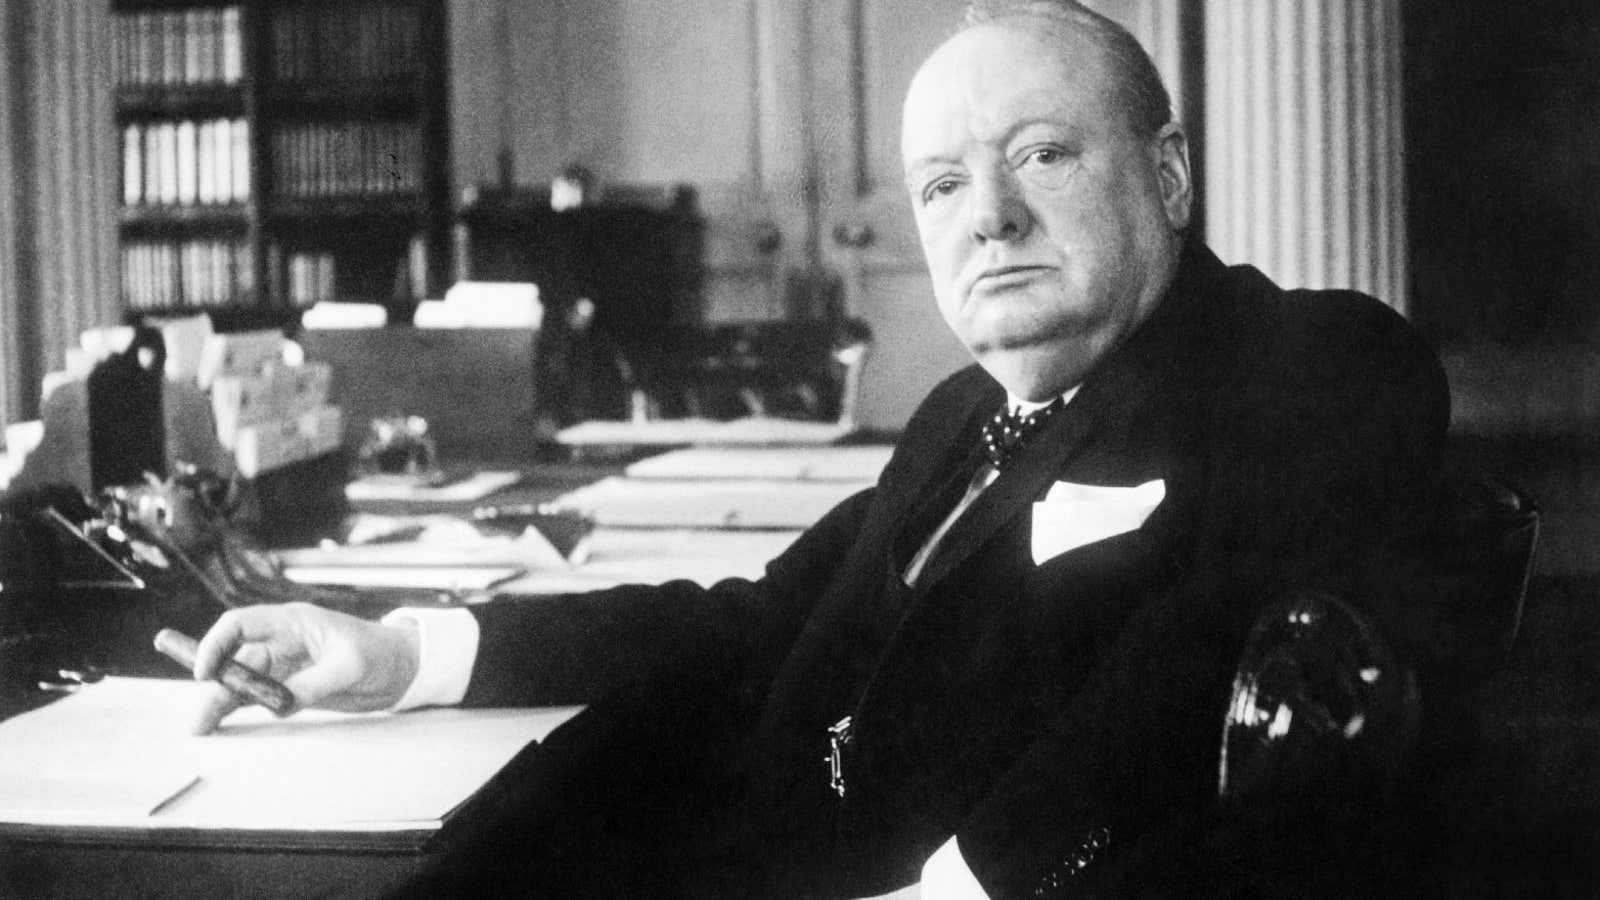 Churchill’s six-volume history of WWII won the Nobel Prize.